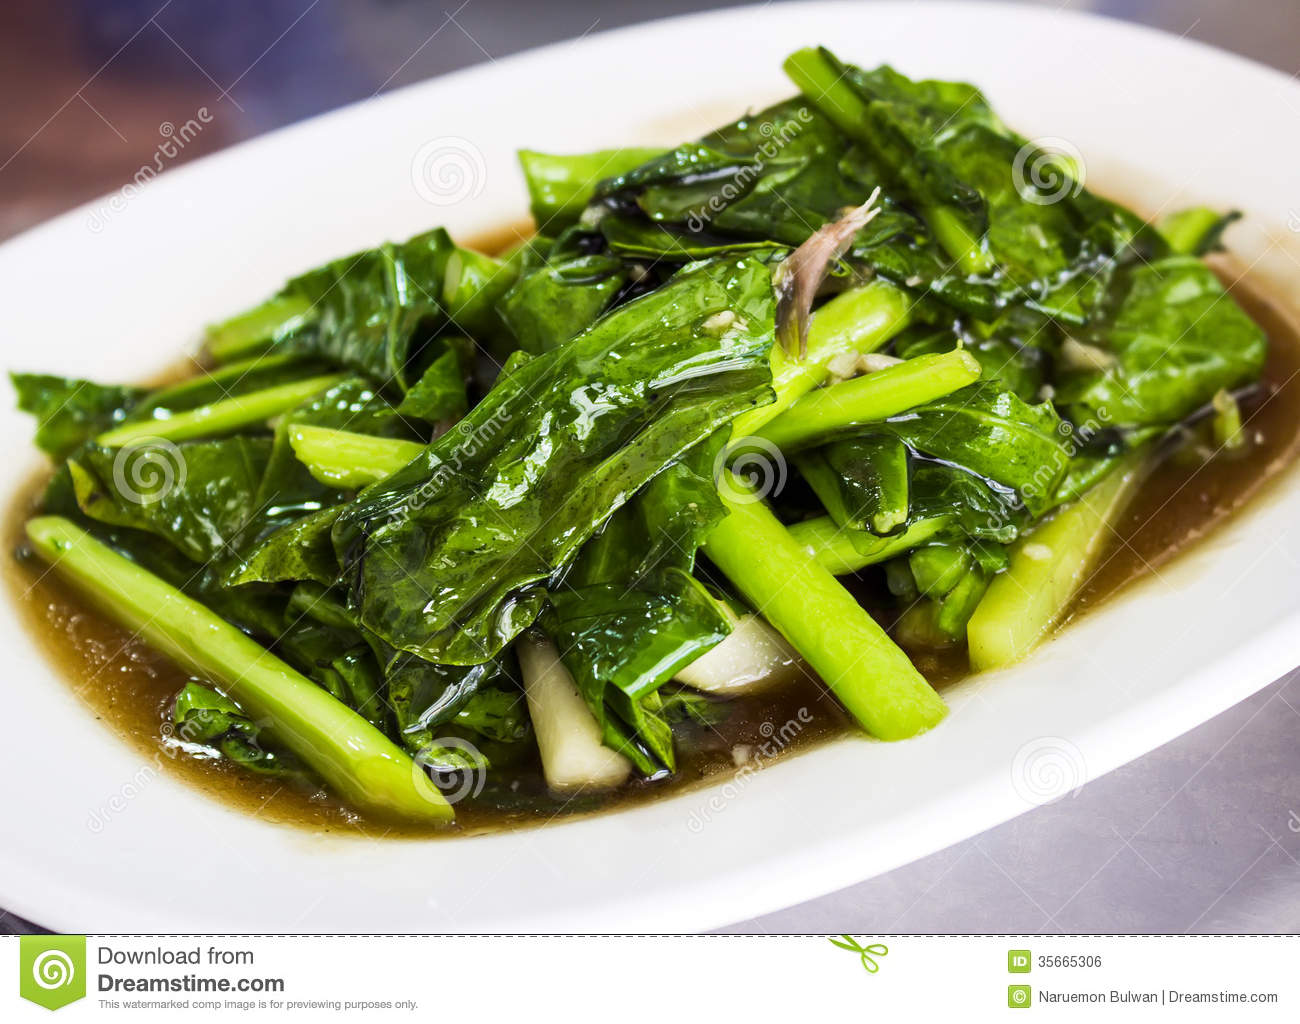 Green Kale Fried In Oyster Sauce Royalty Free Stock Image   Image